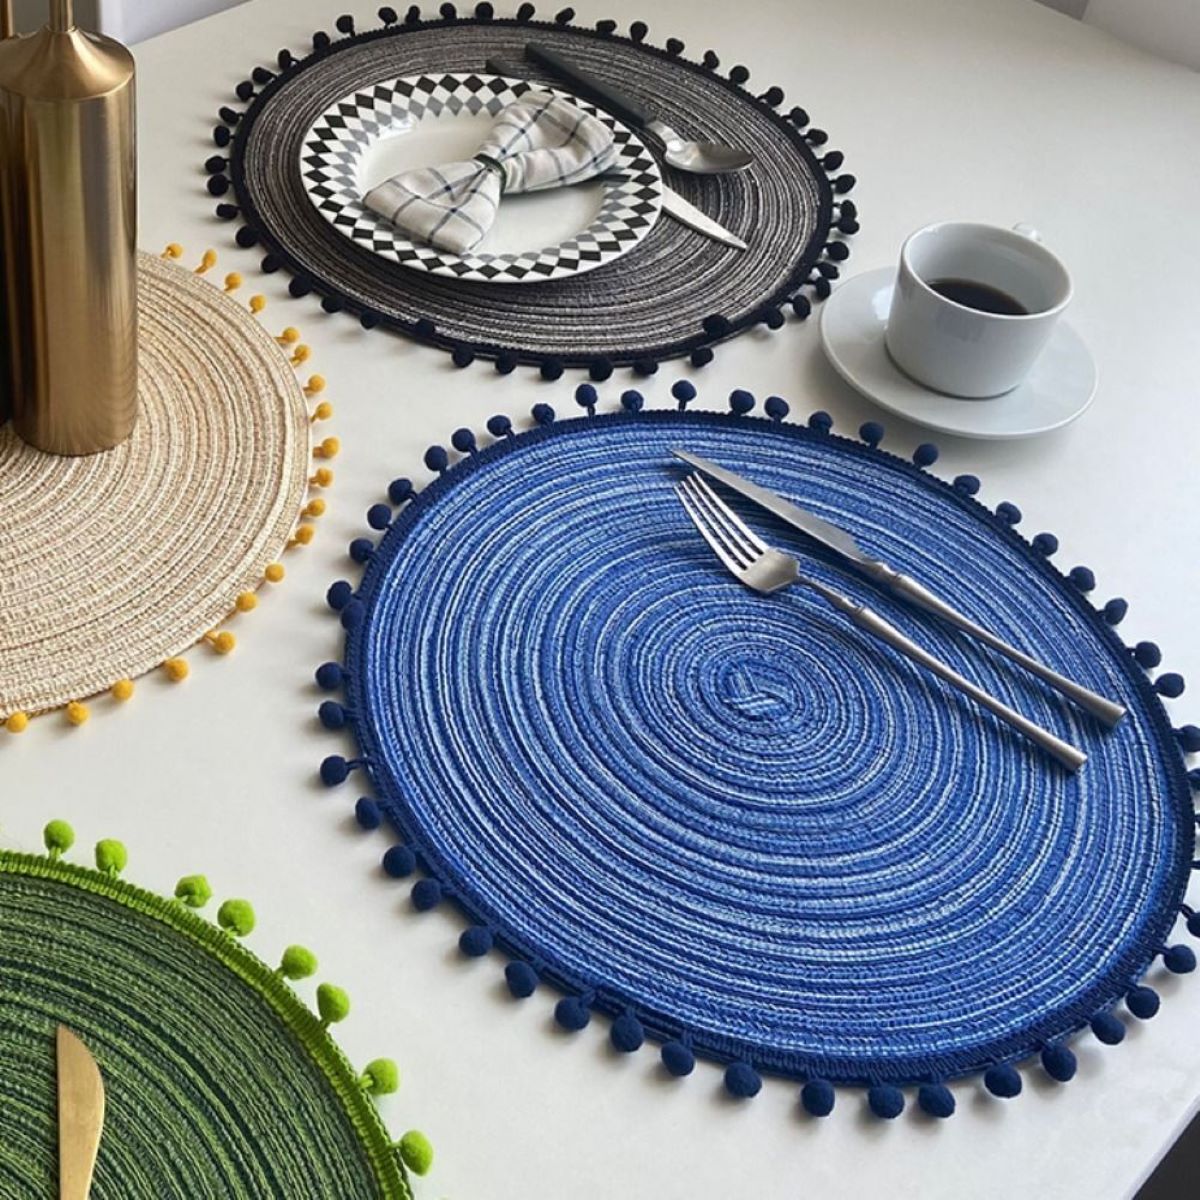 How To Make Woven Placemats